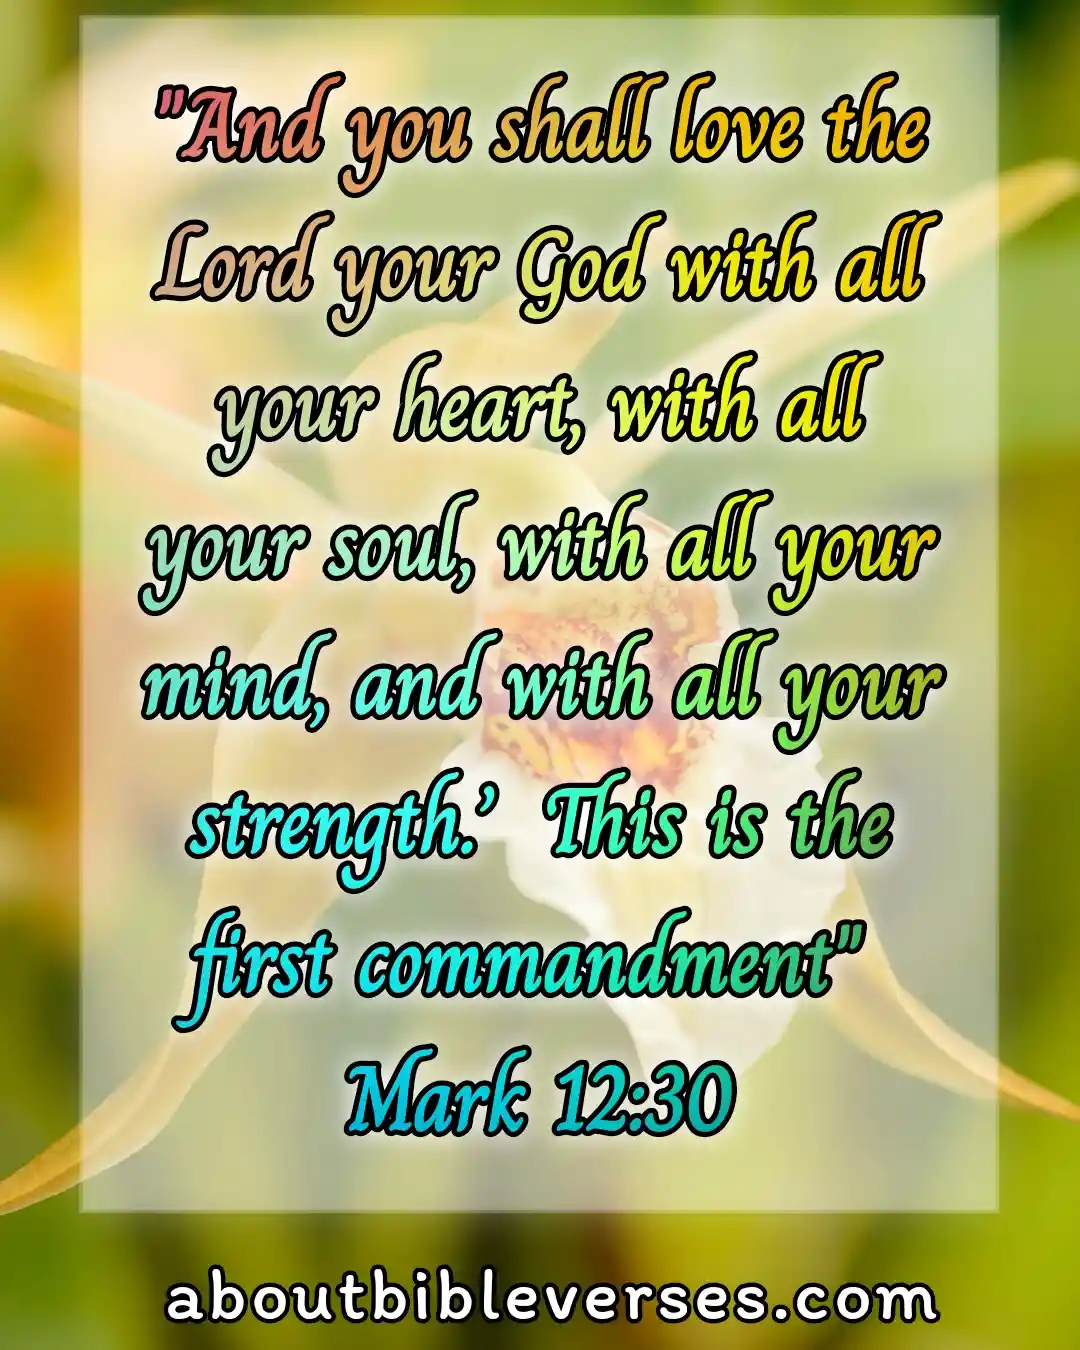 bible verses about your soul and heart (Mark 12:30)